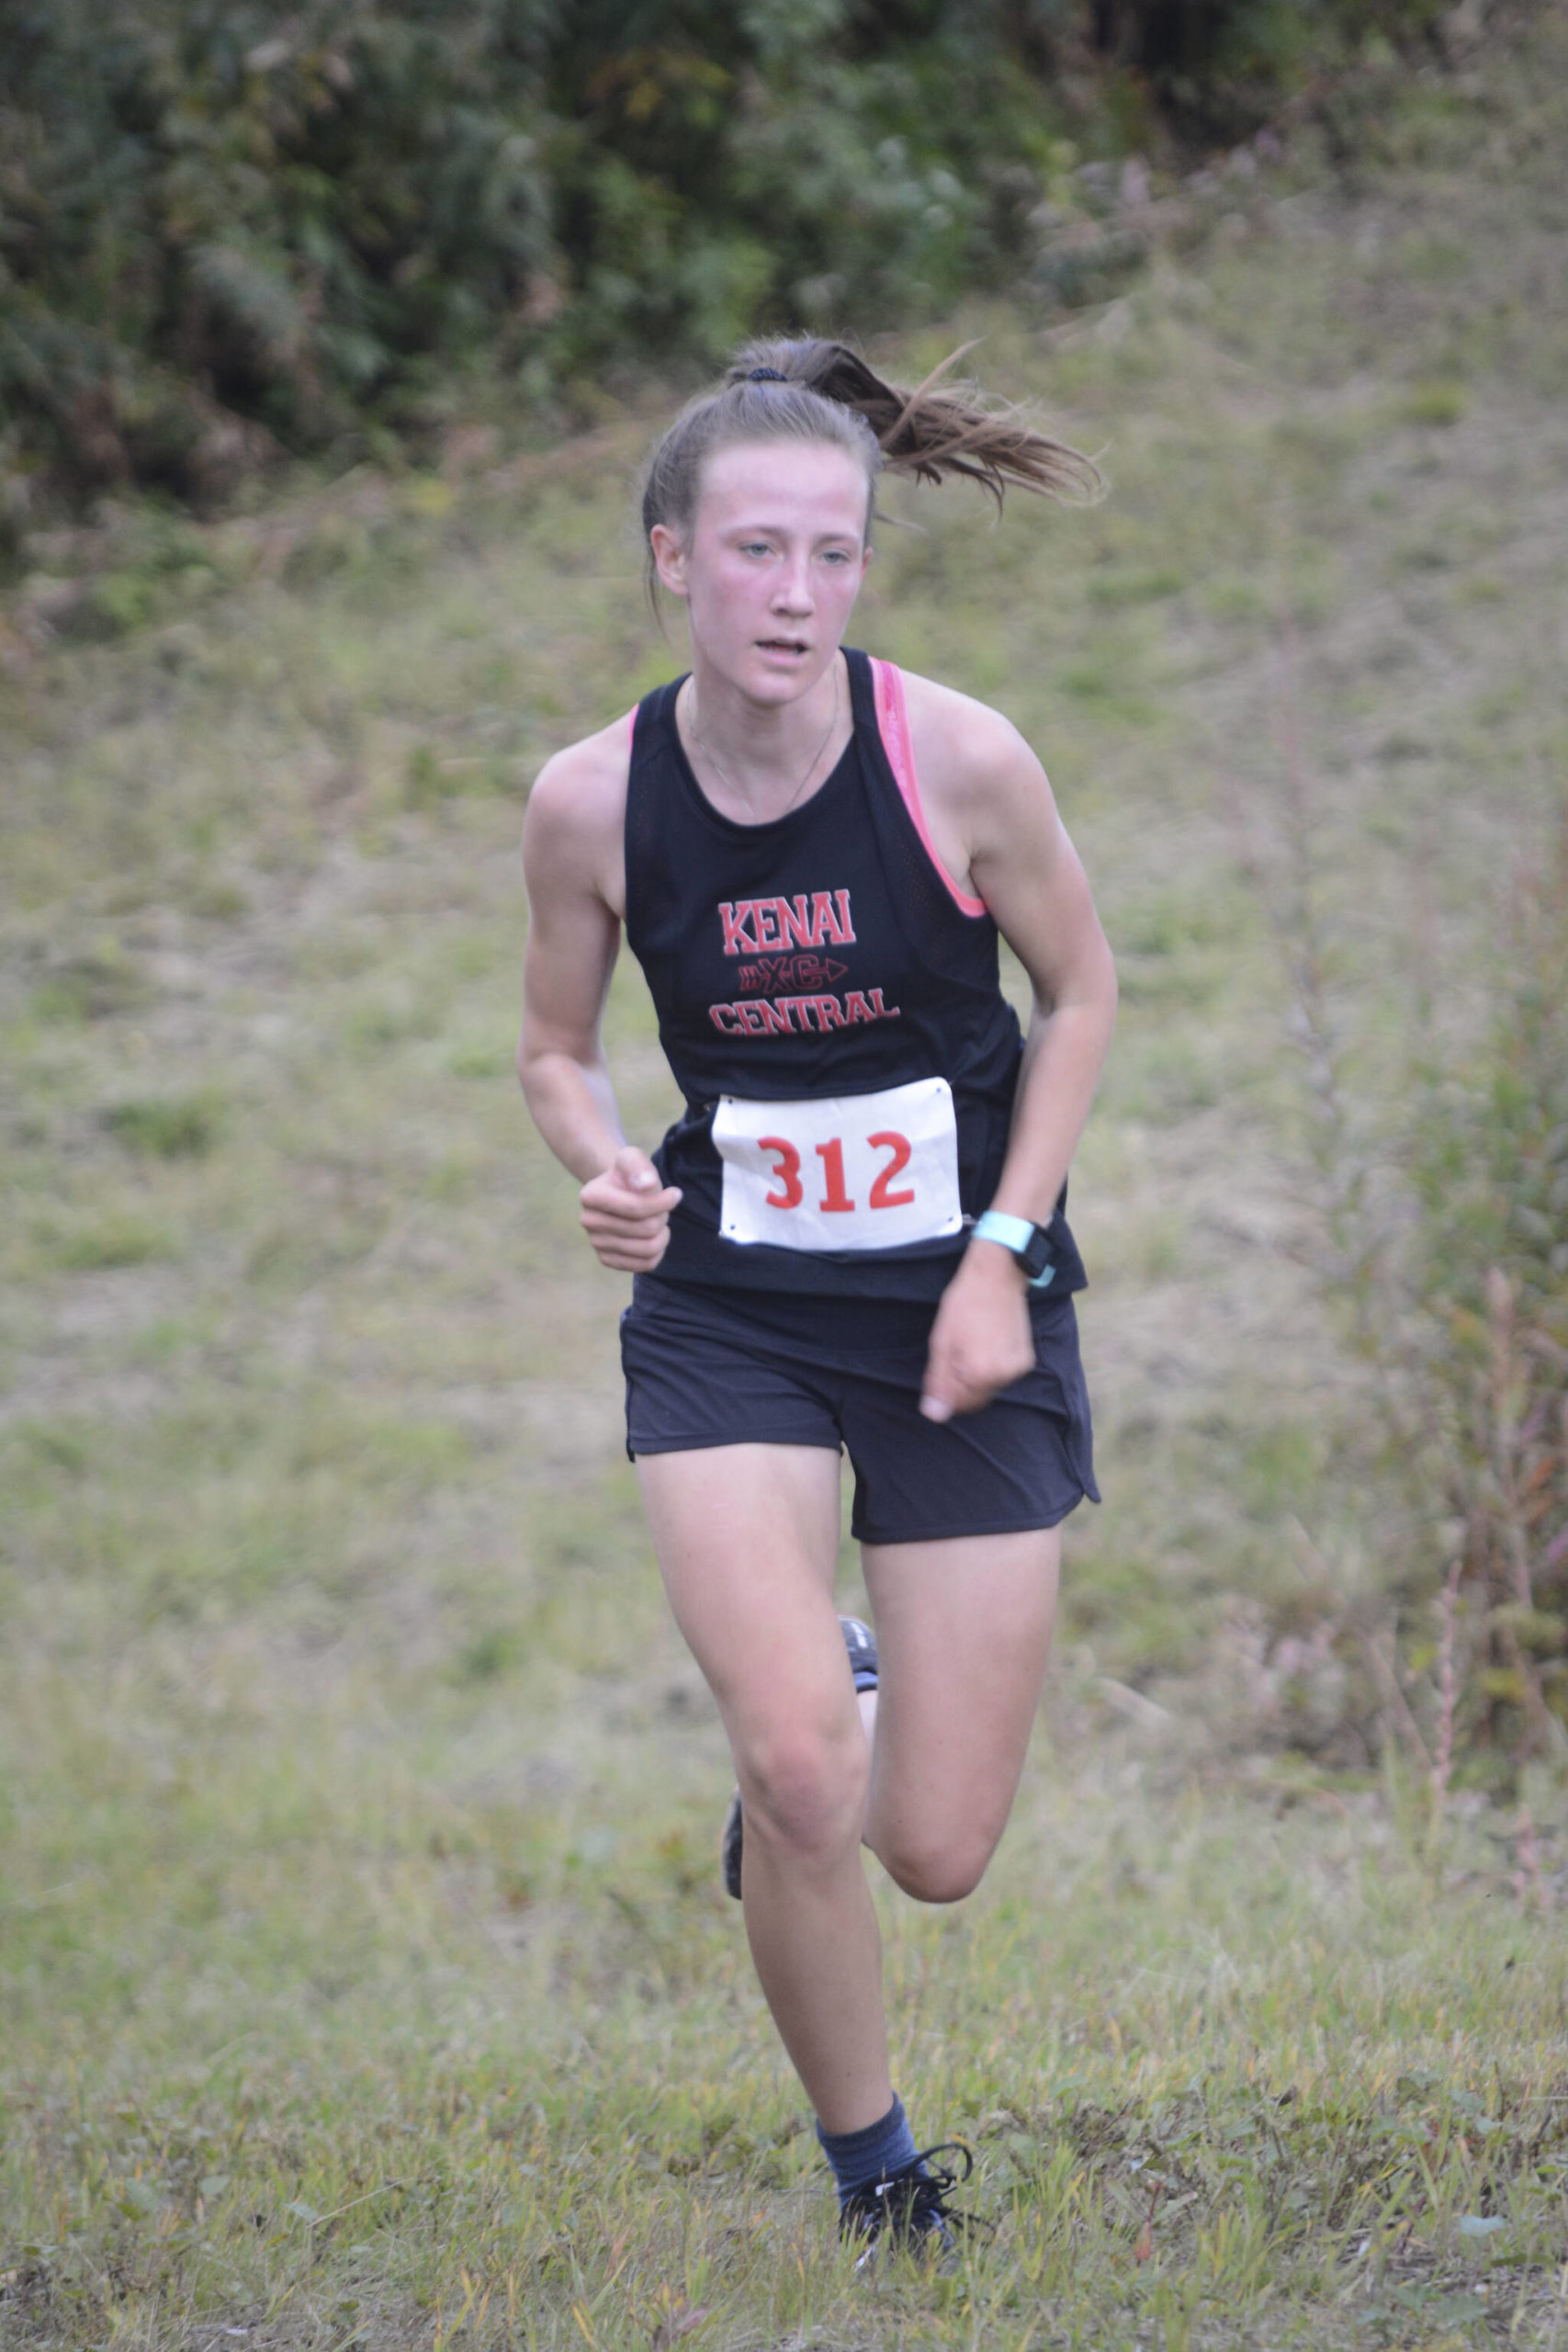 Jayna Boonstra of Kenai Central comes down the last hill to win the Homer Invite on Friday, Sept. 2, 2022, at the Lookout Mountain Trails near Homer, Alaska. (Photo by Michael Armstrong/Homer News)